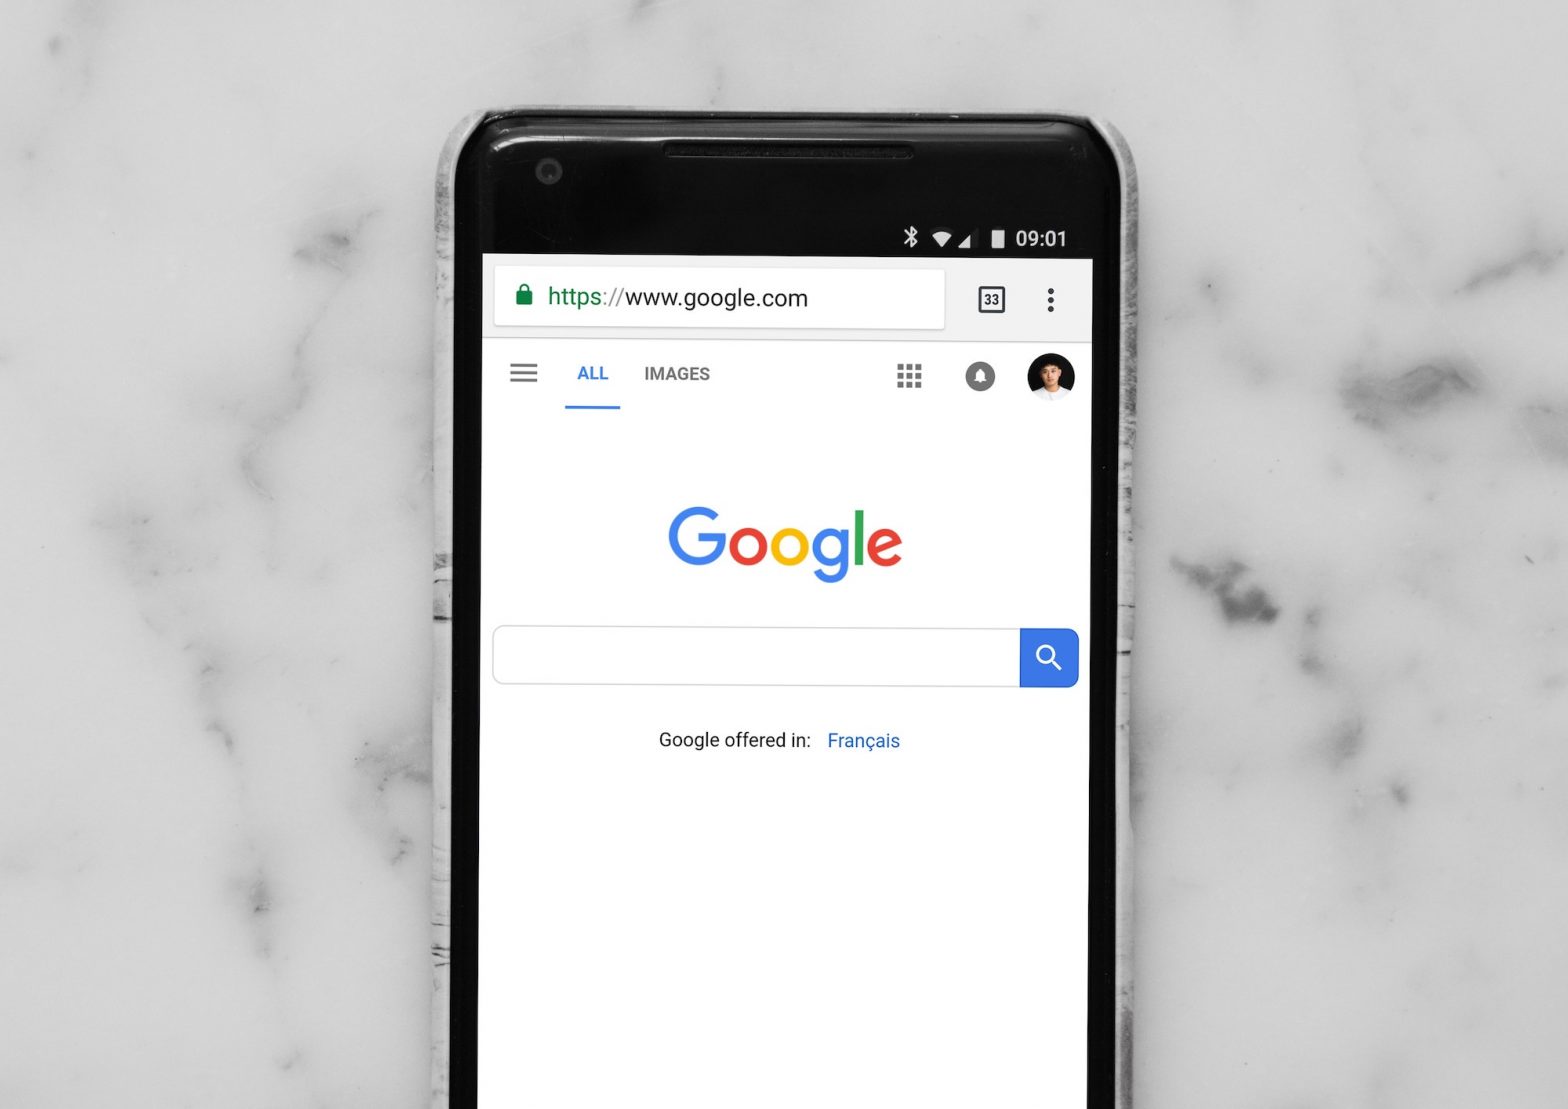 Google Search on Mobile Phone